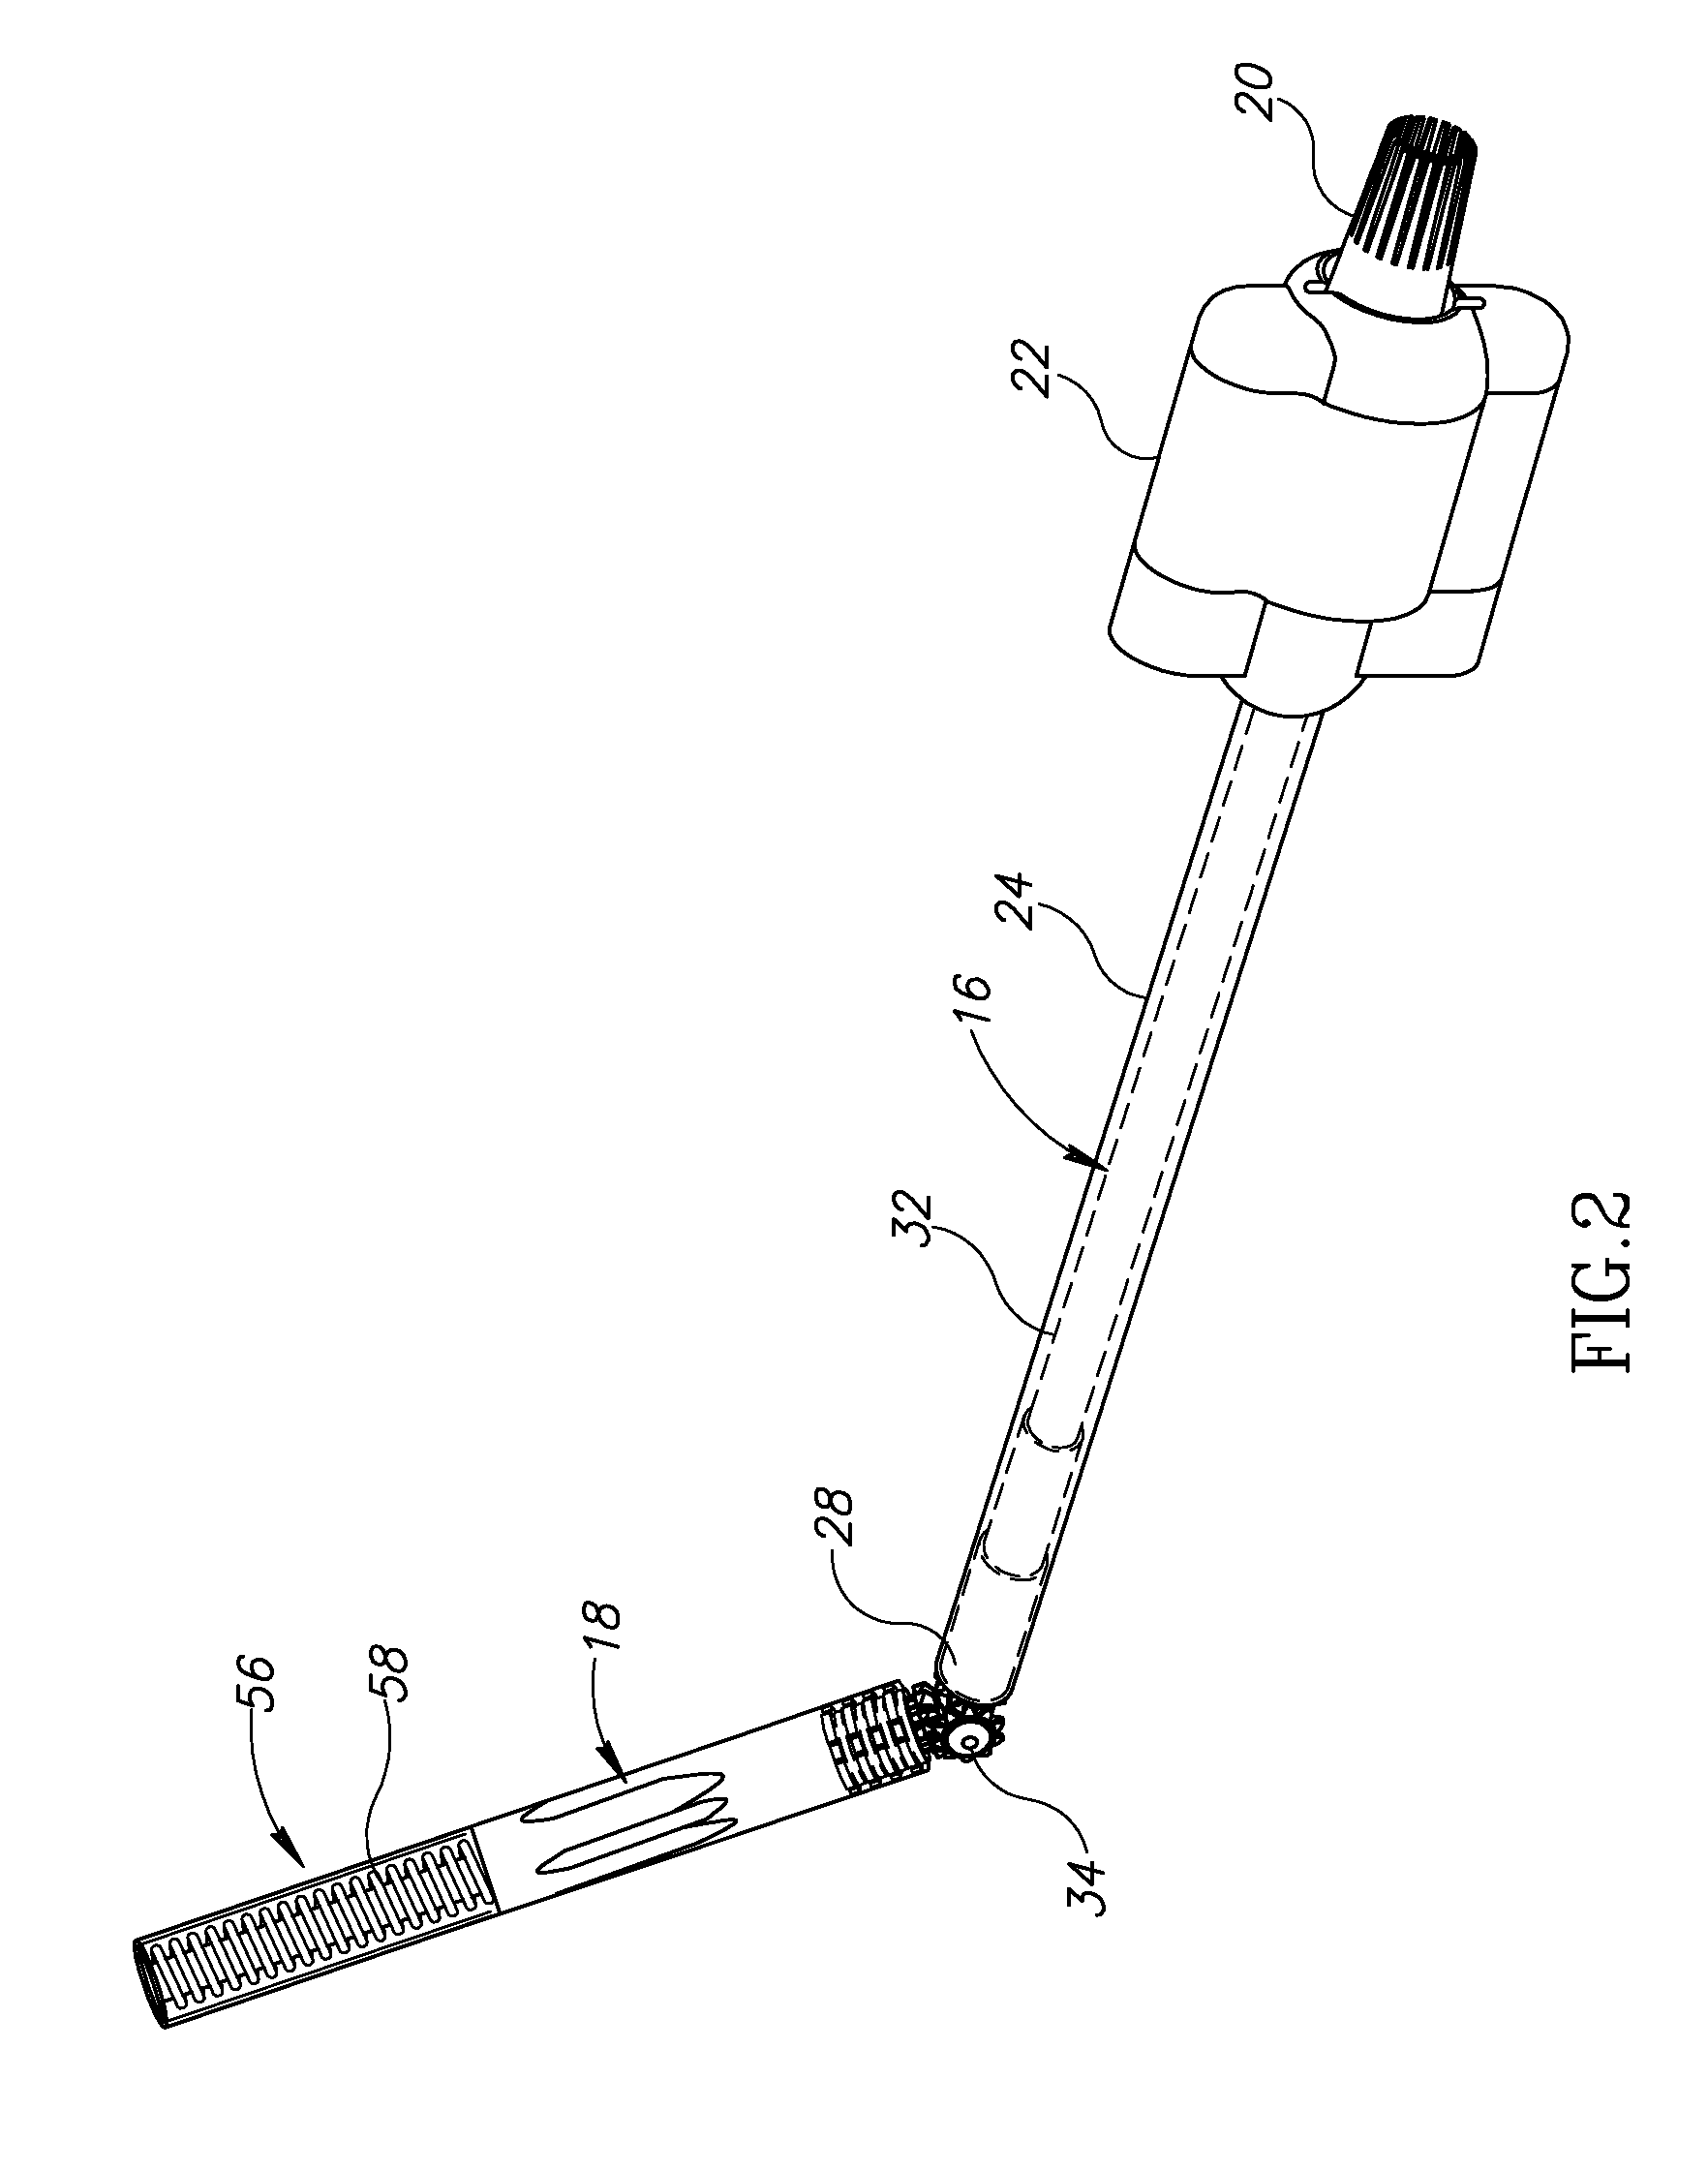 Device and method for applying rotary tacks